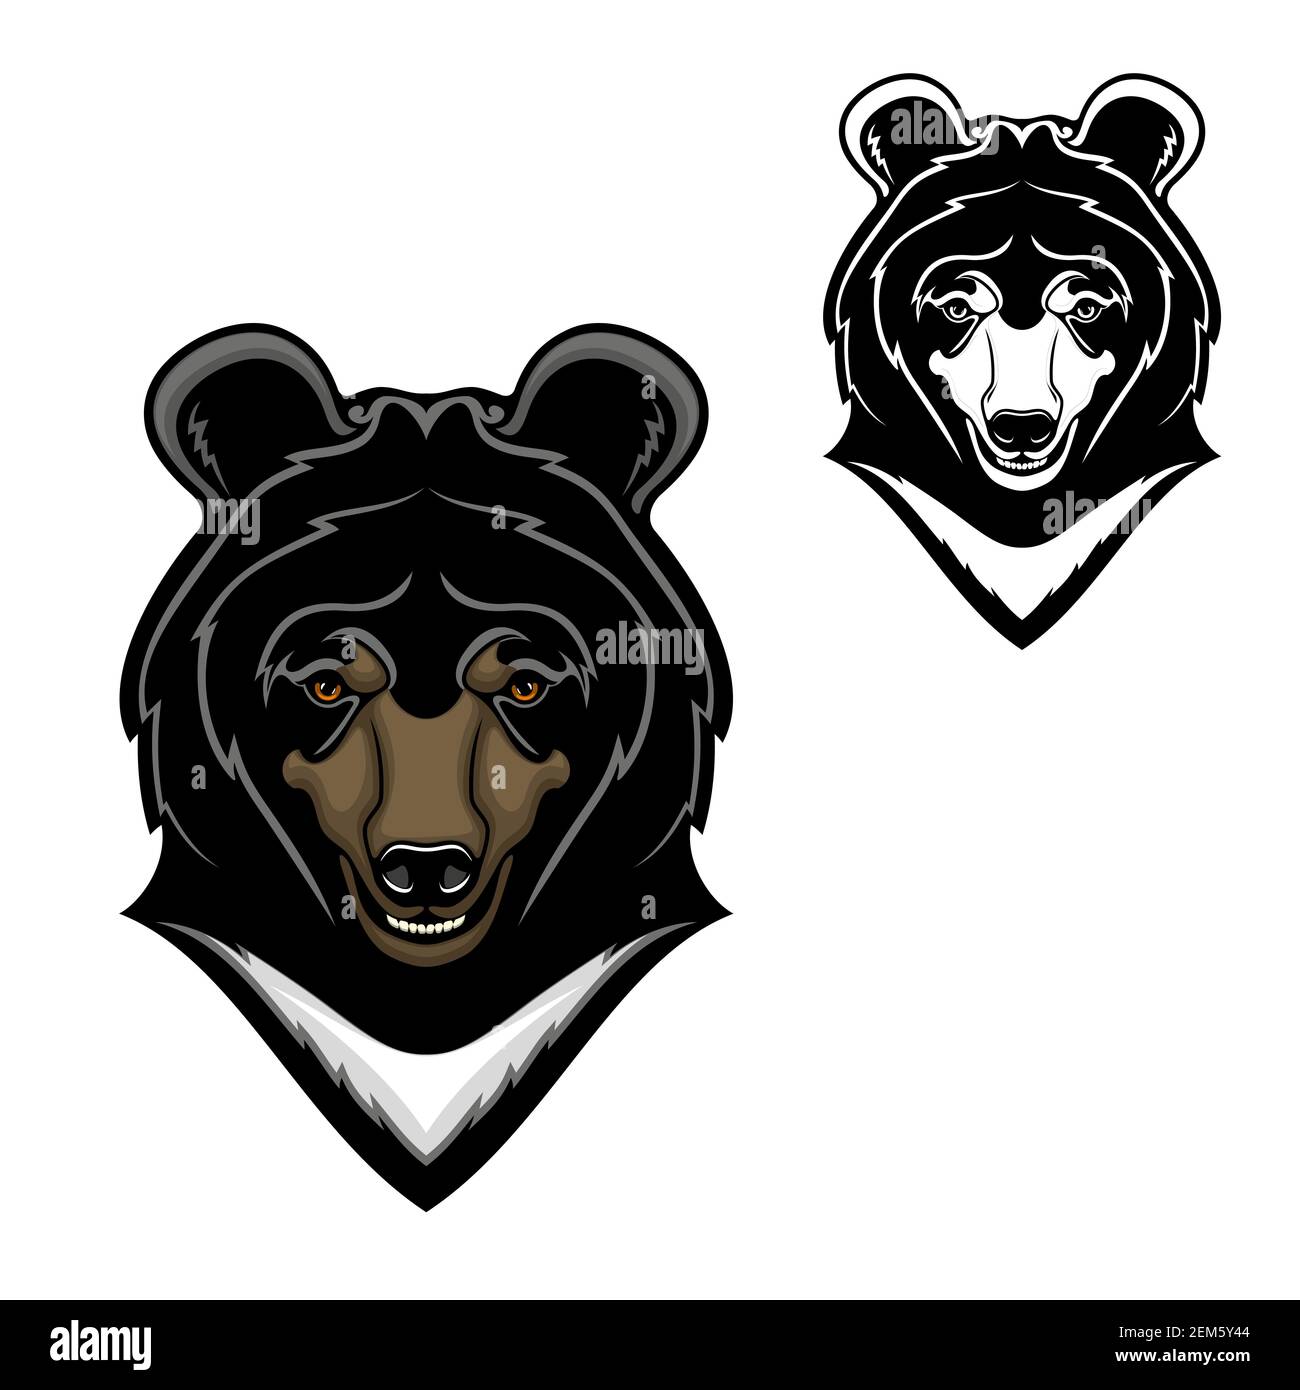 Bear animal head vector cartoon of Himalayan bear mascot design. Wild predatory mammal with white chest, long snout and teeth, mountain forest wildlif Stock Vector